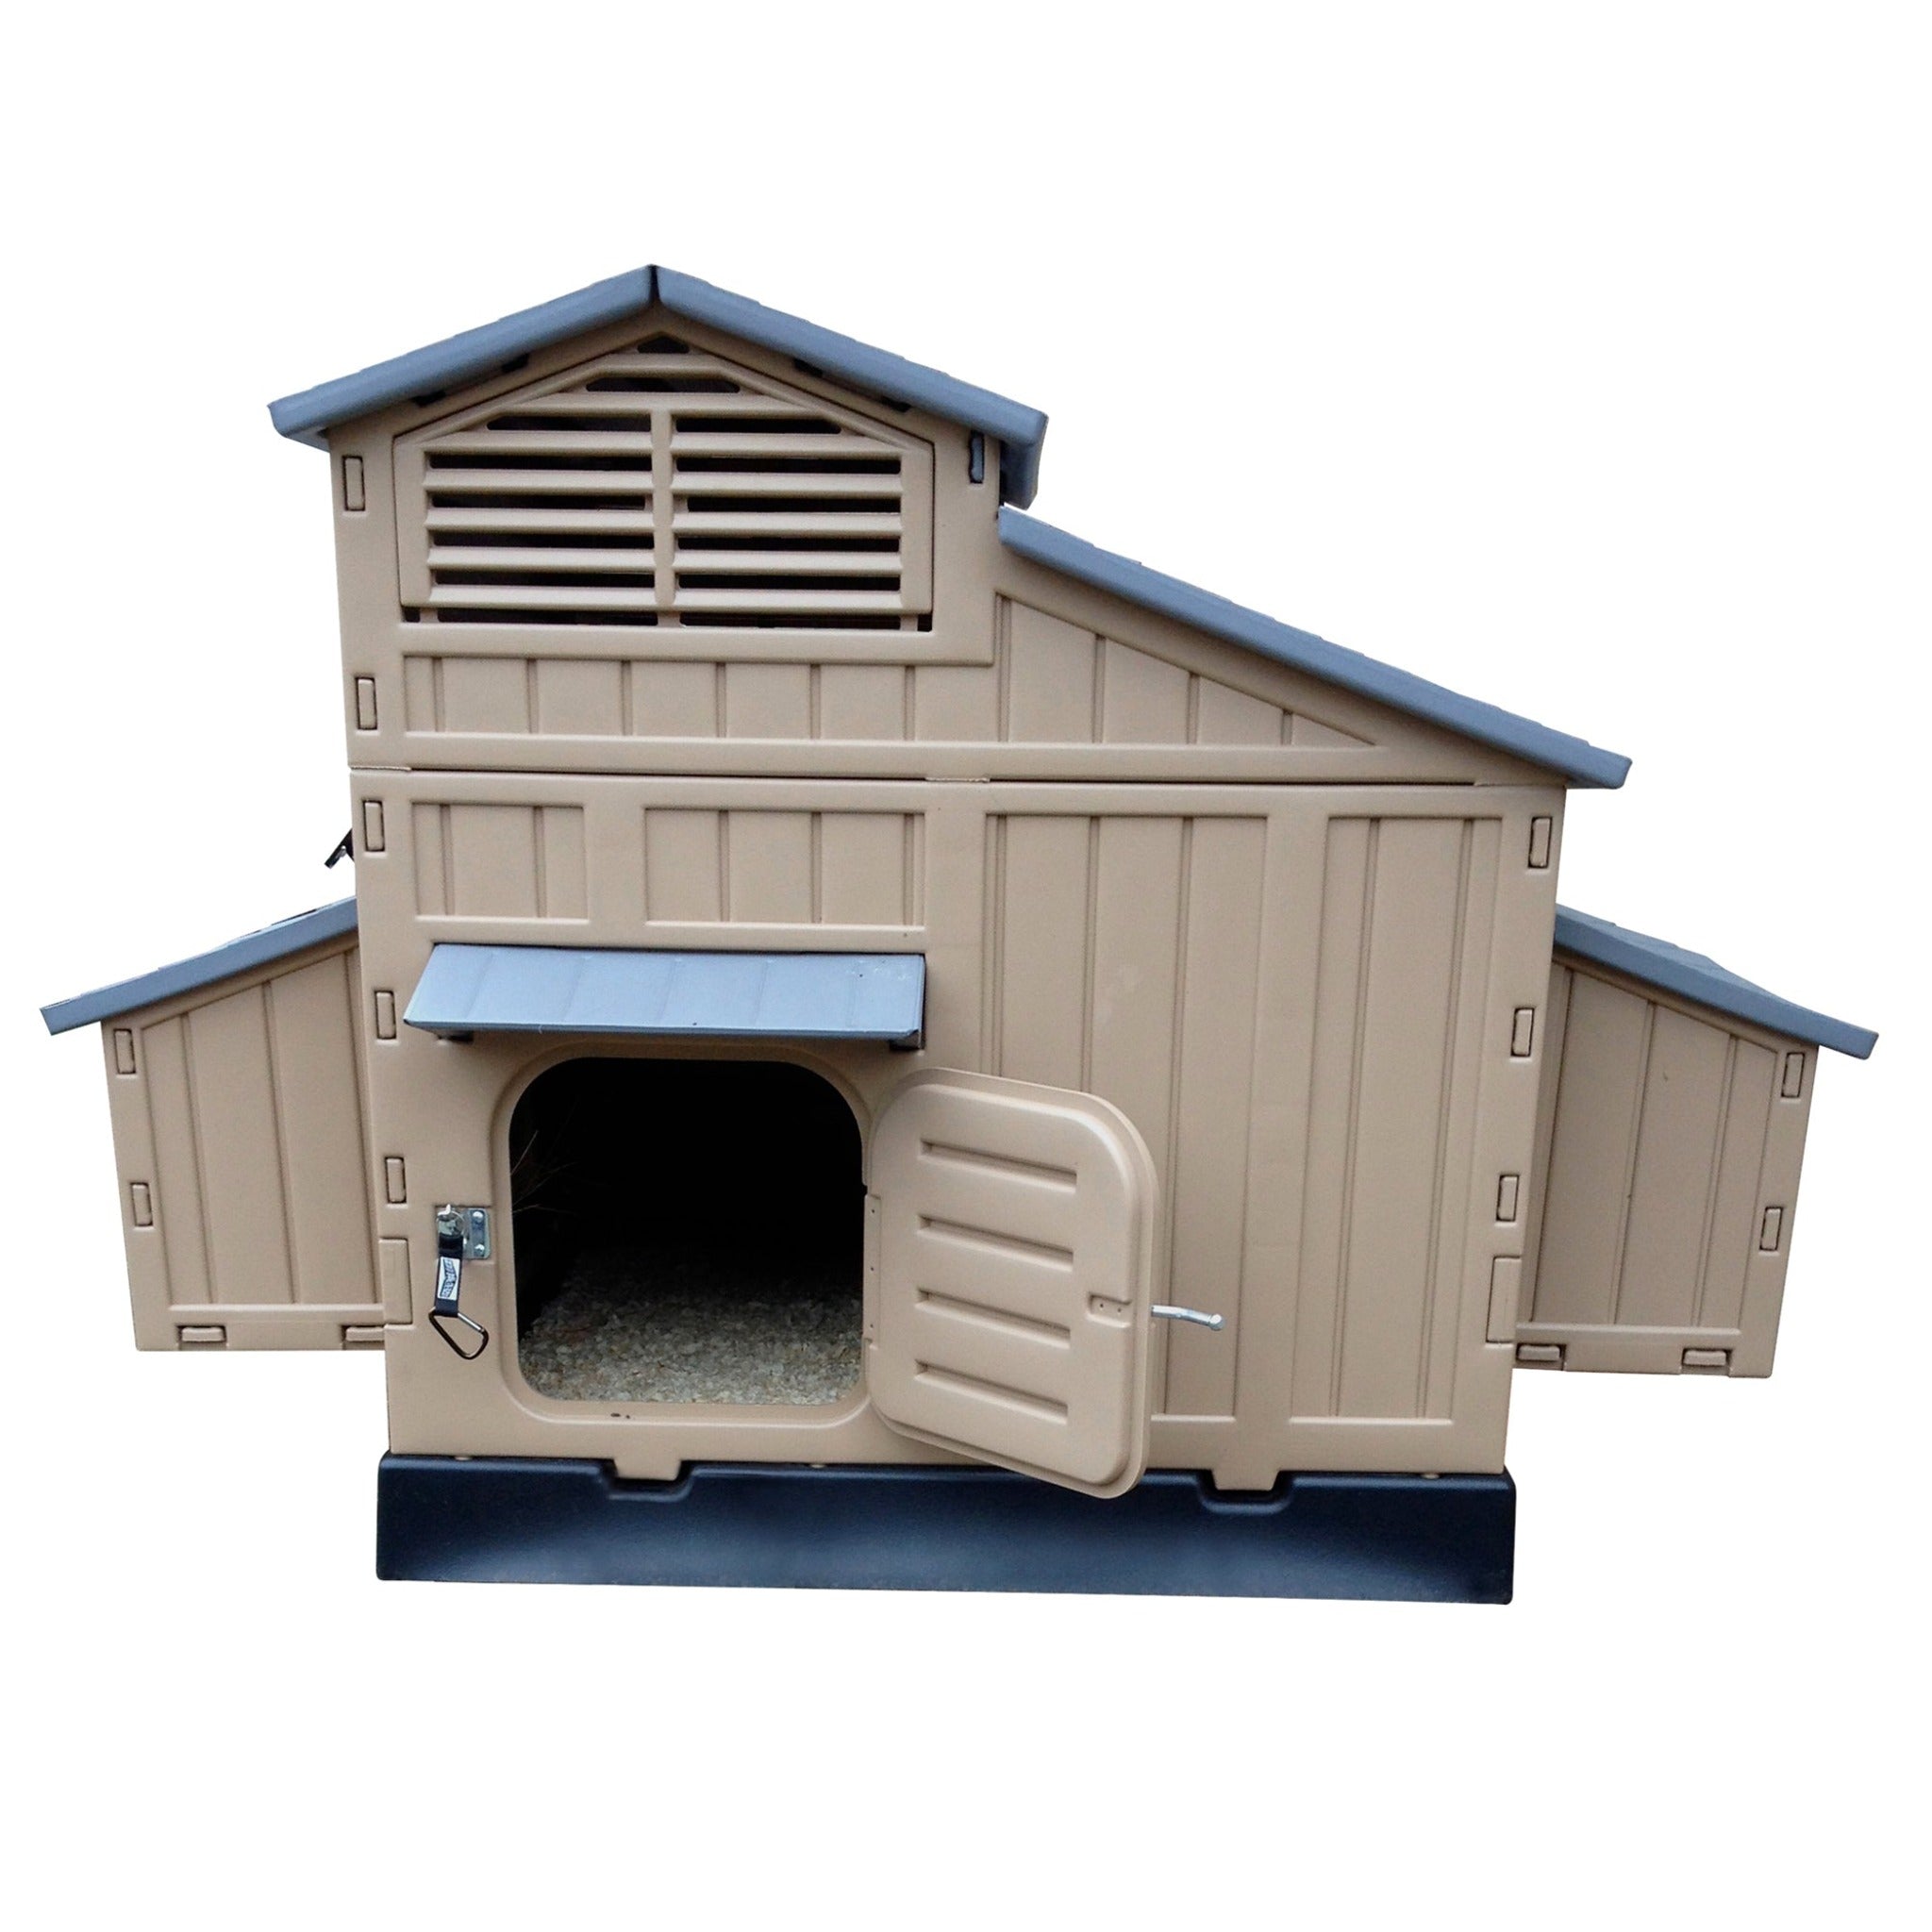 Hatching Time. Large Formex chicken coop front view with Door open.